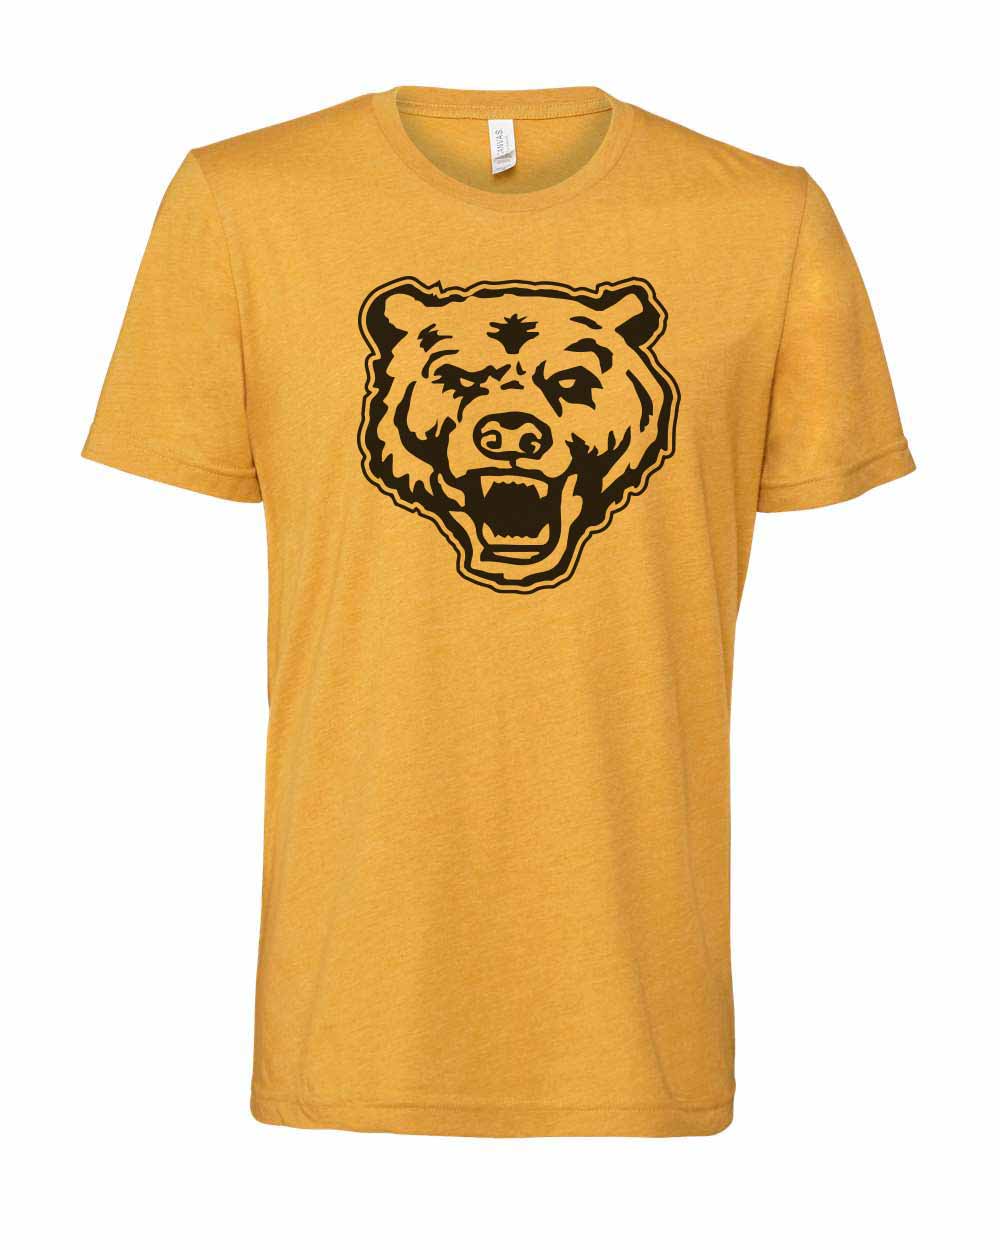 Show off your Upper Arlington Golden Bear Pride with this classic edition t-shirt. The officially licensed Golden Bear logo printed in black on a mustard t-shirt.